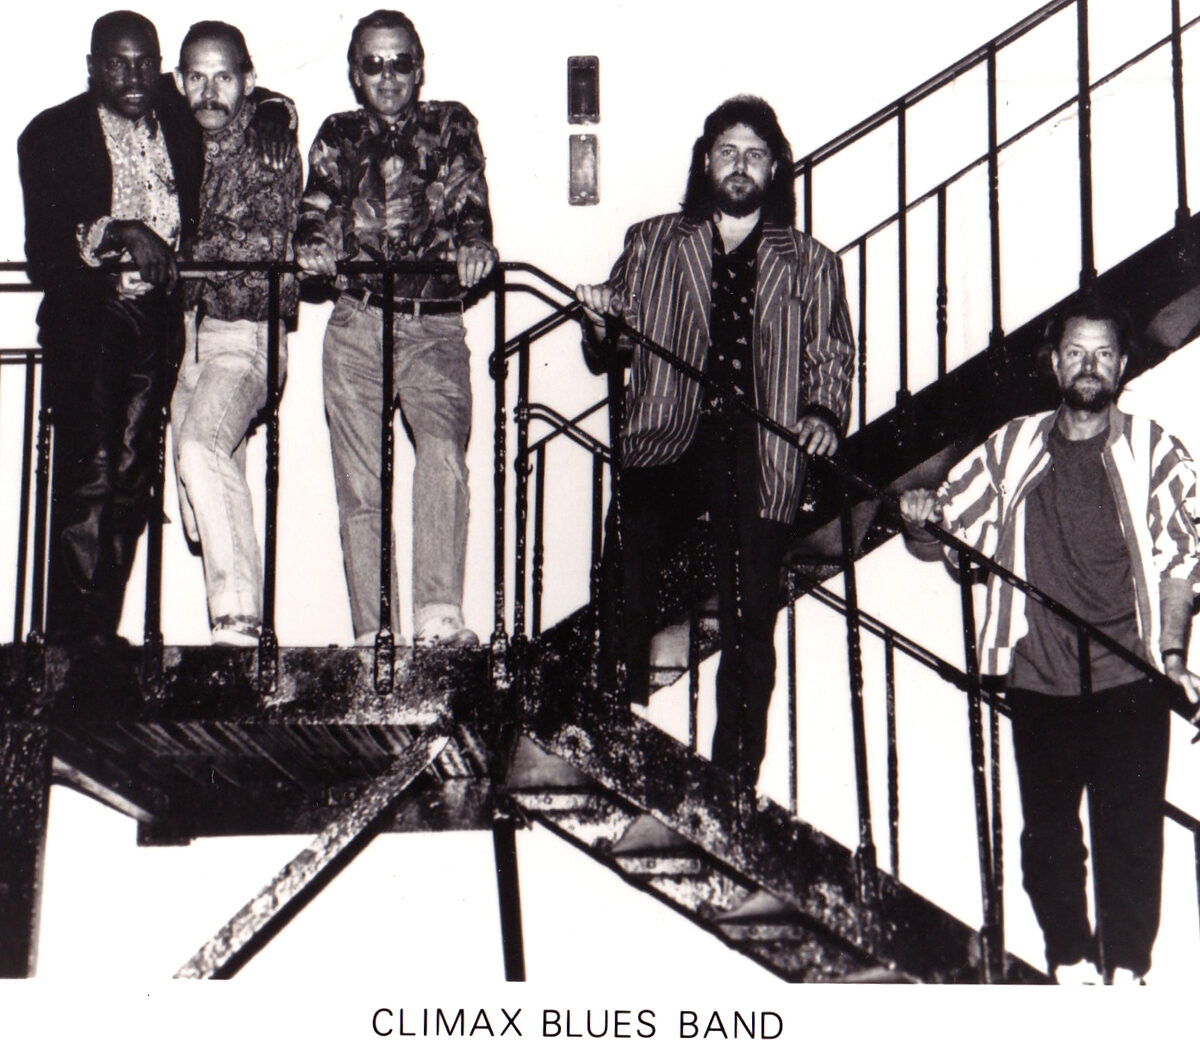 Climax Blues Band Press 90s